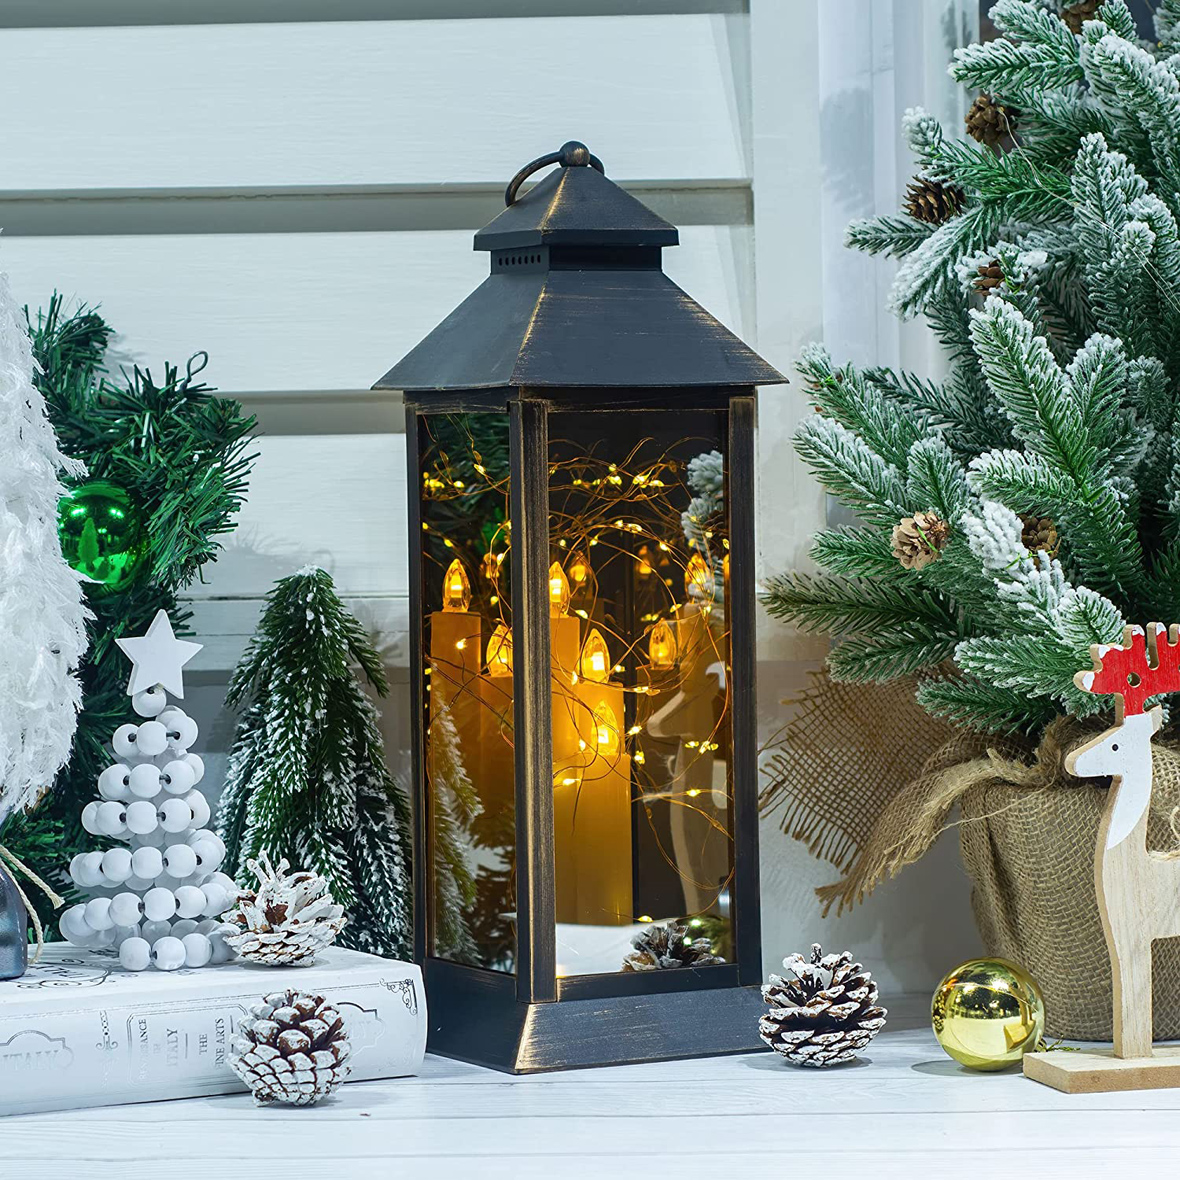 Yongmao Large Decorative Candle Lantern 17 Inch Tall Golden Brushed Black Vintage Lantern with Fairy String Lights Hanging Lantern with Timer for Indoor Outdoor Christmas Garden Yard Home Decor